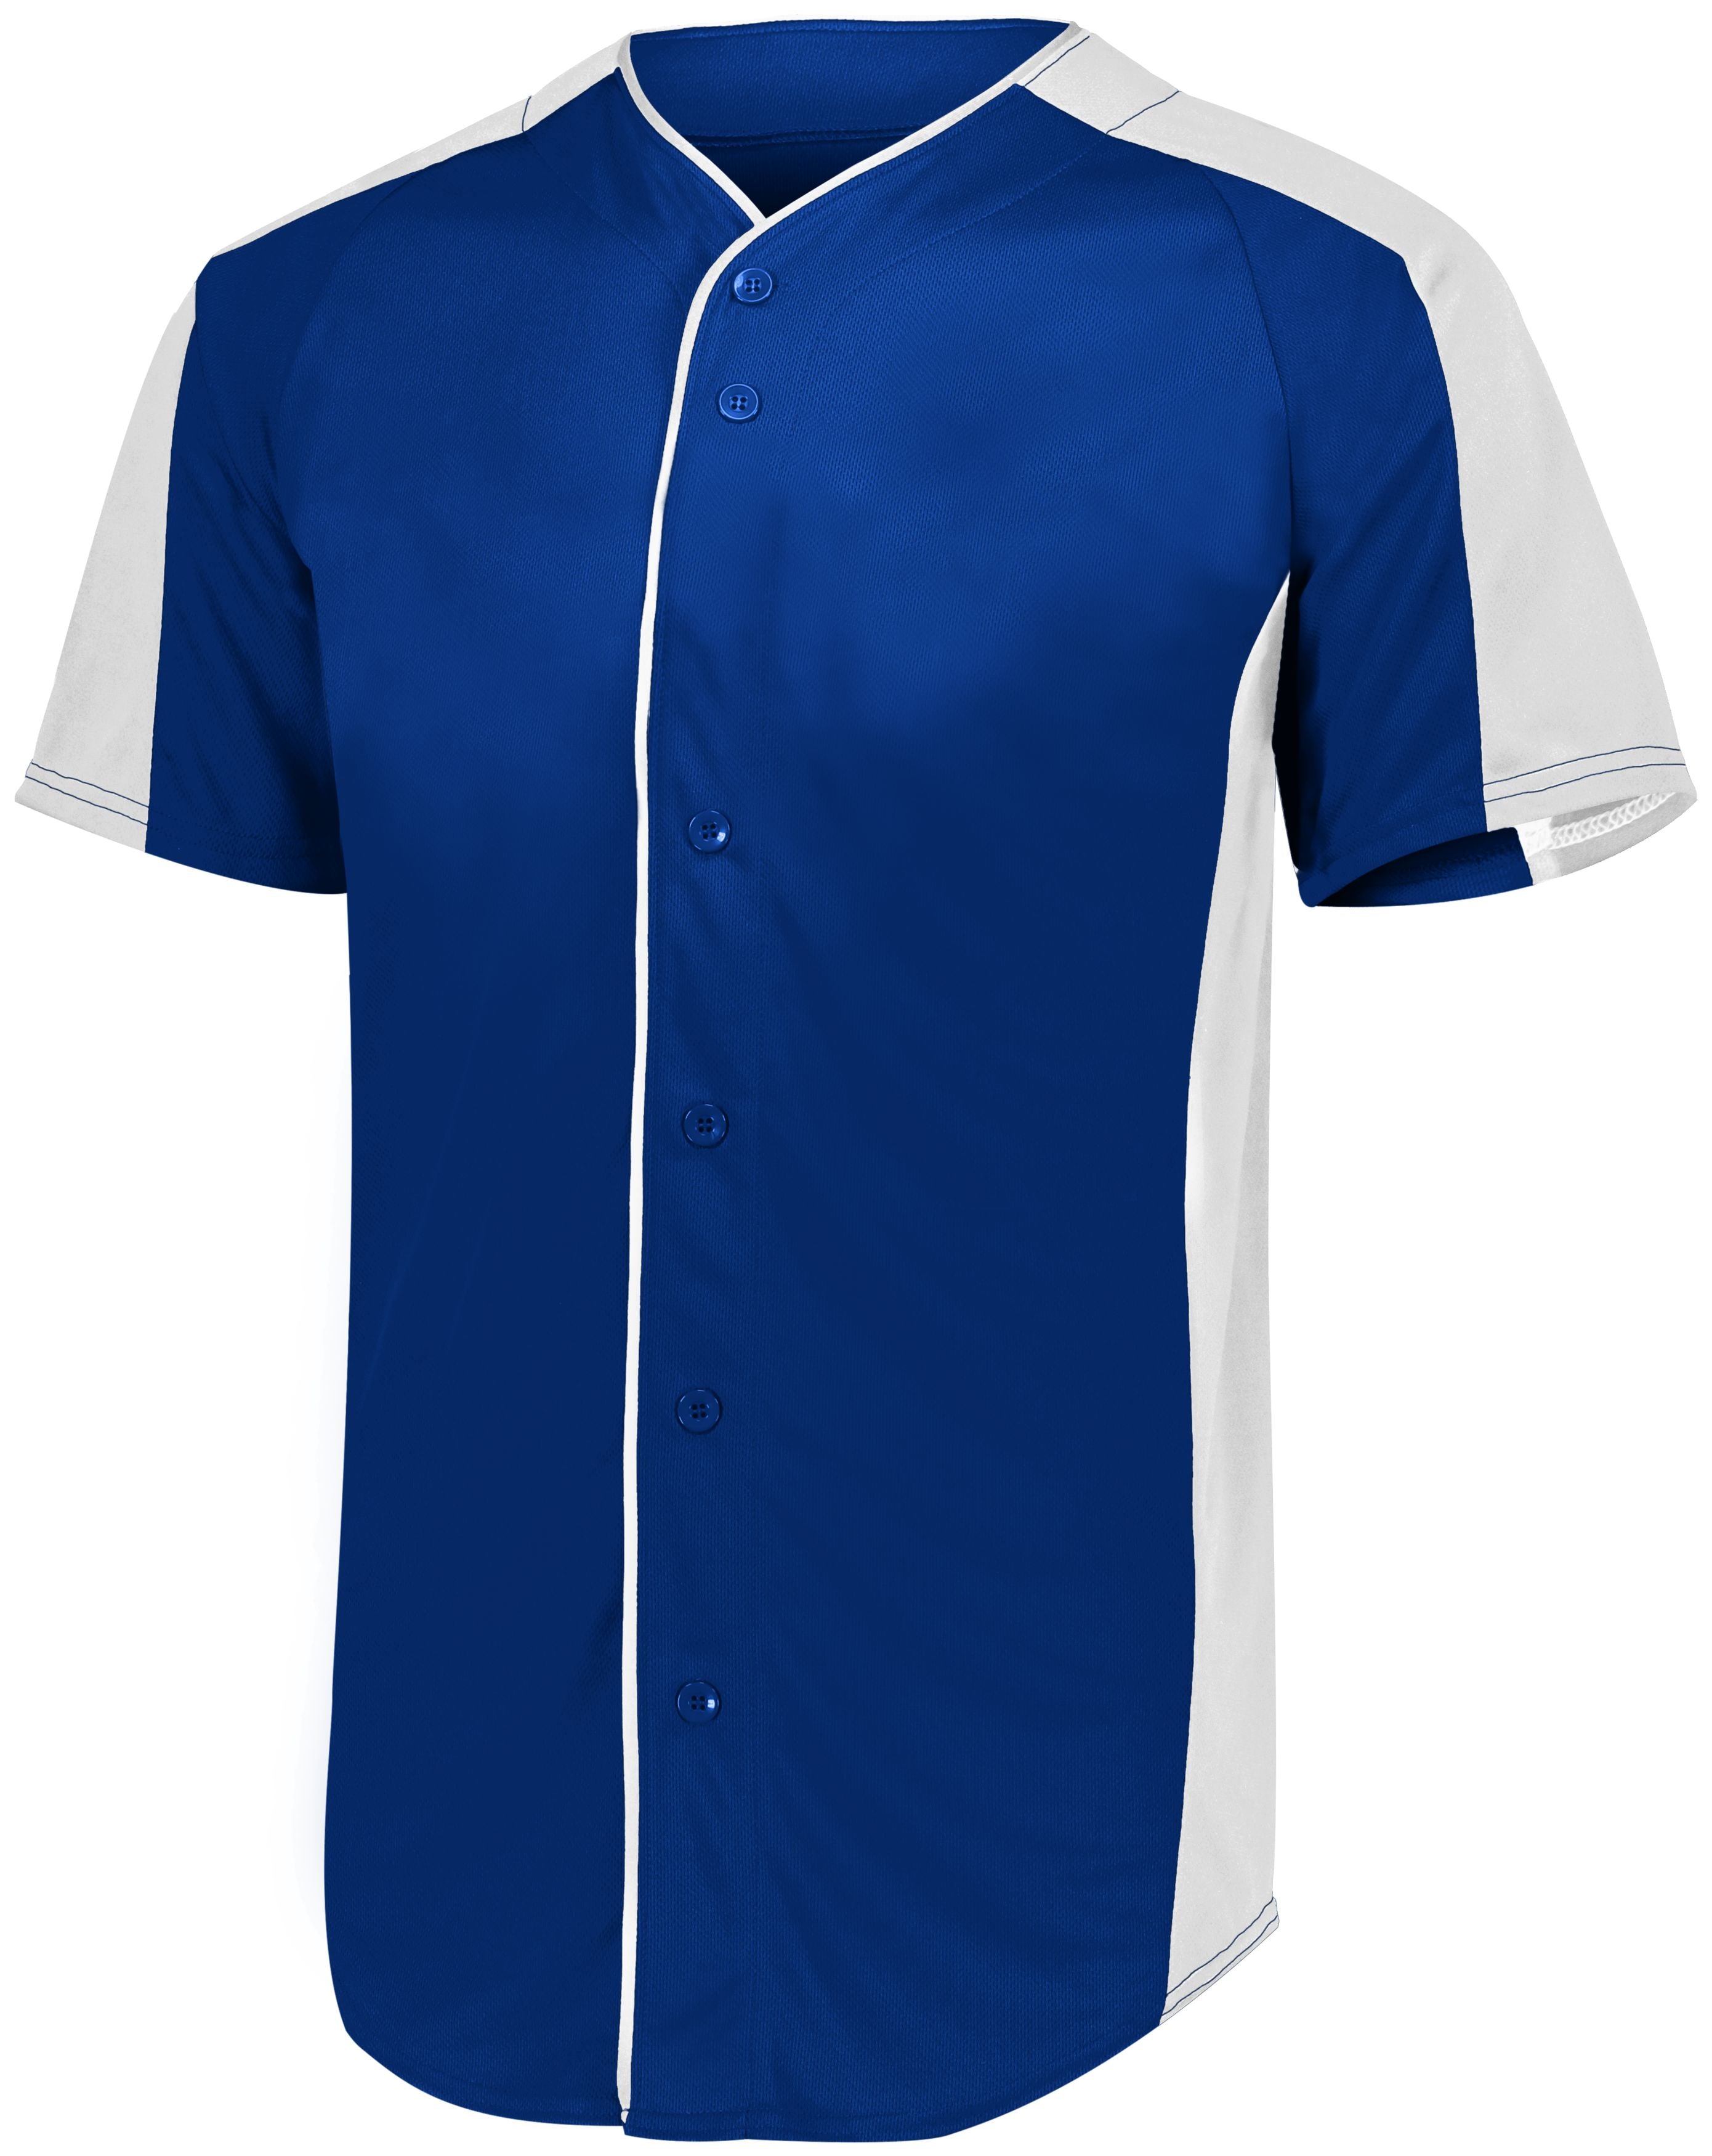 Augusta Sportswear Youth Full-Button Baseball Jersey in Navy/White  -Part of the Youth, Youth-Jersey, Augusta-Products, Baseball, Shirts, All-Sports, All-Sports-1 product lines at KanaleyCreations.com